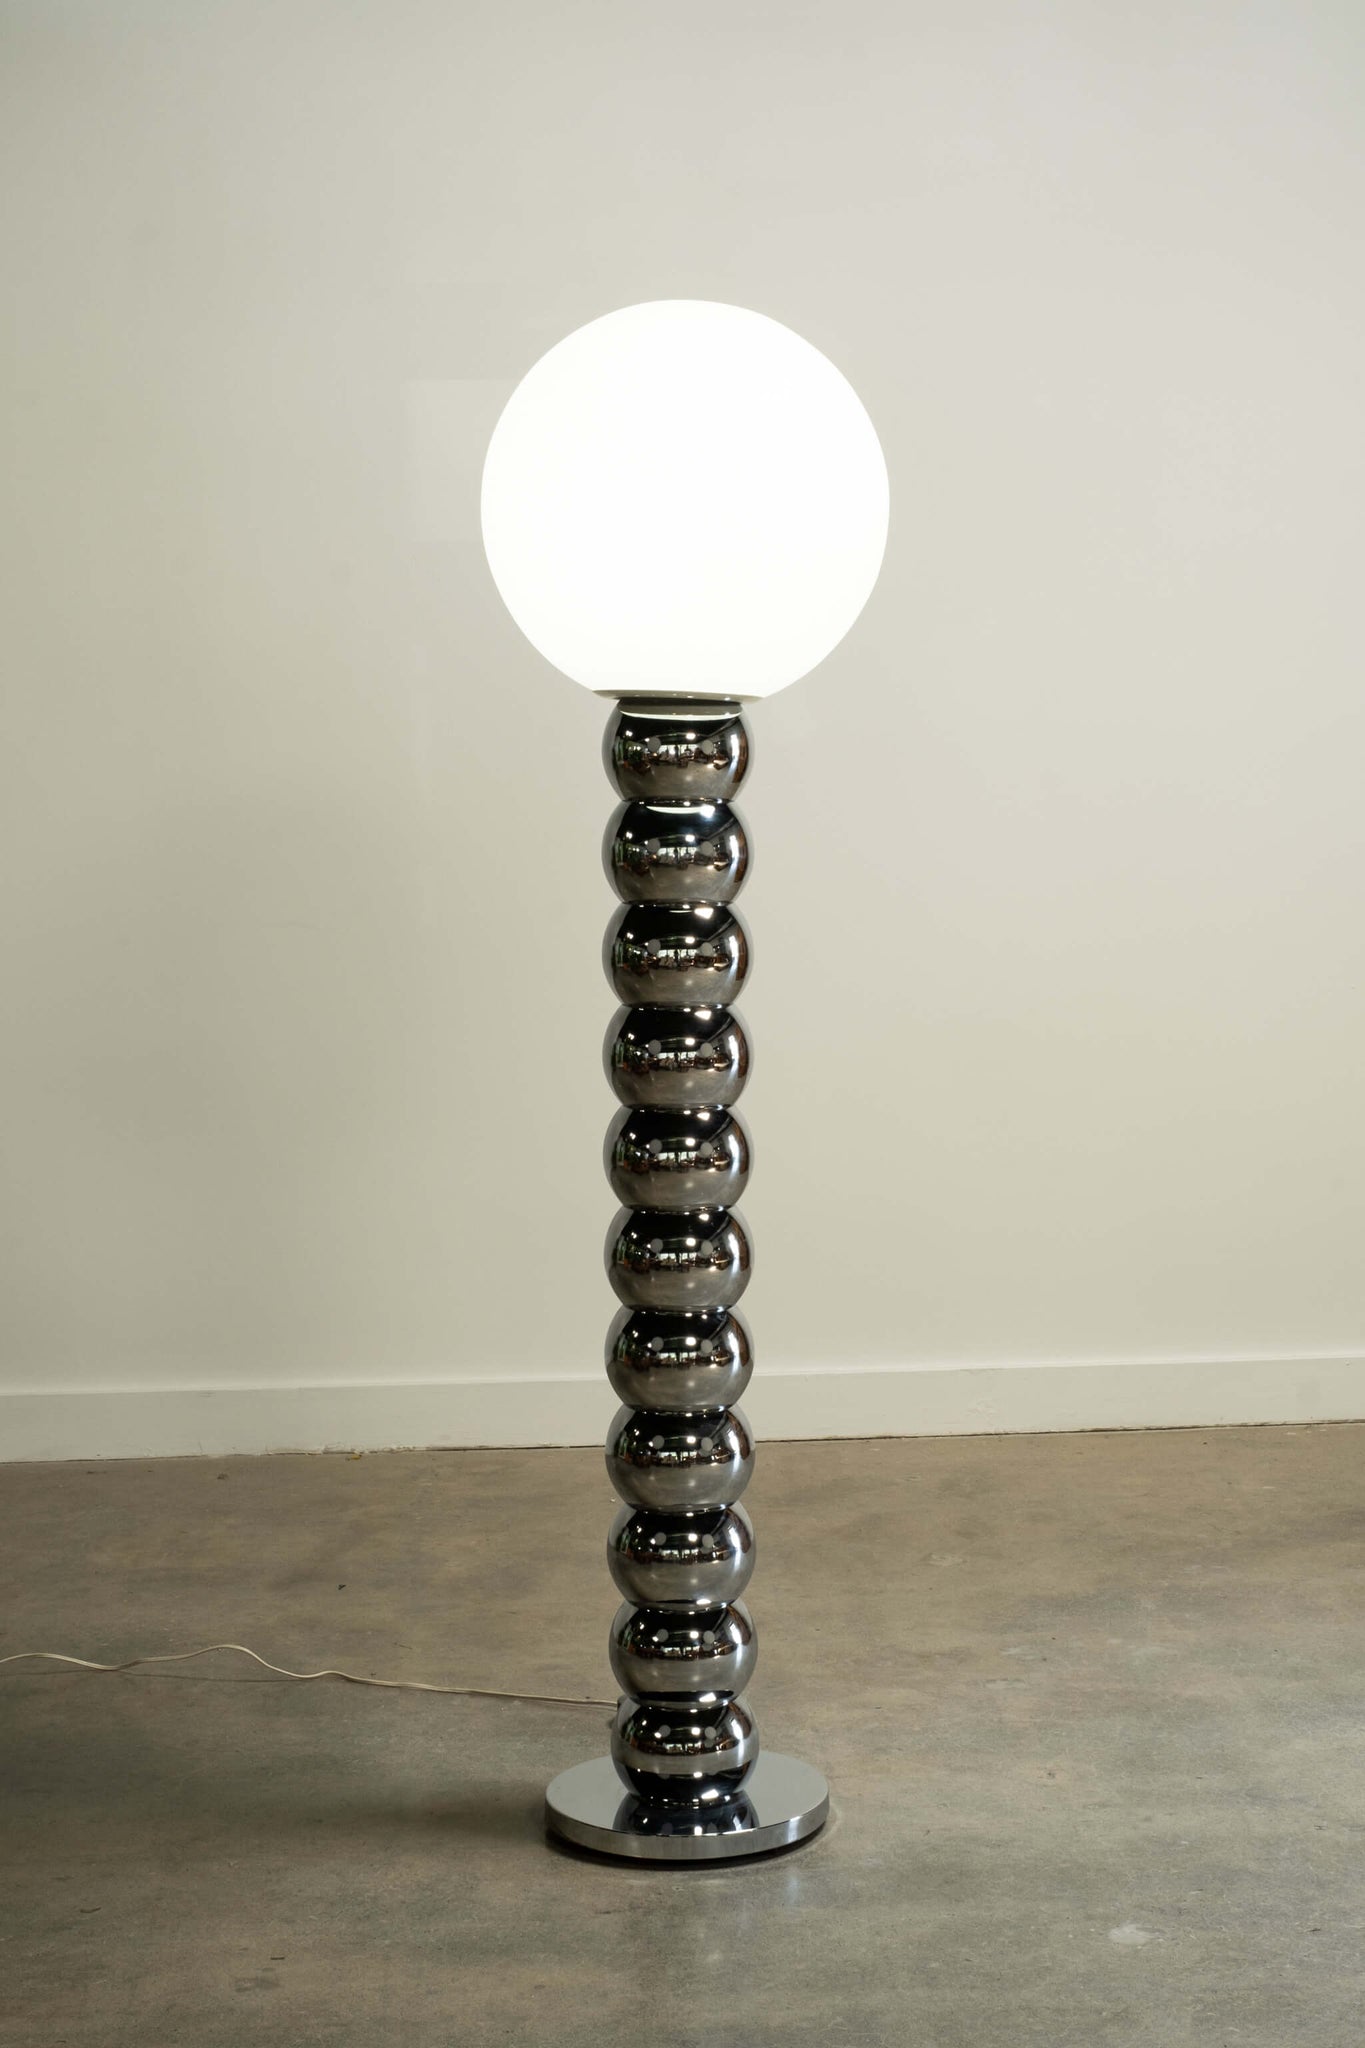 Vintage 1960s Chrome Stacked Ball Floor Lamp, front view and lit